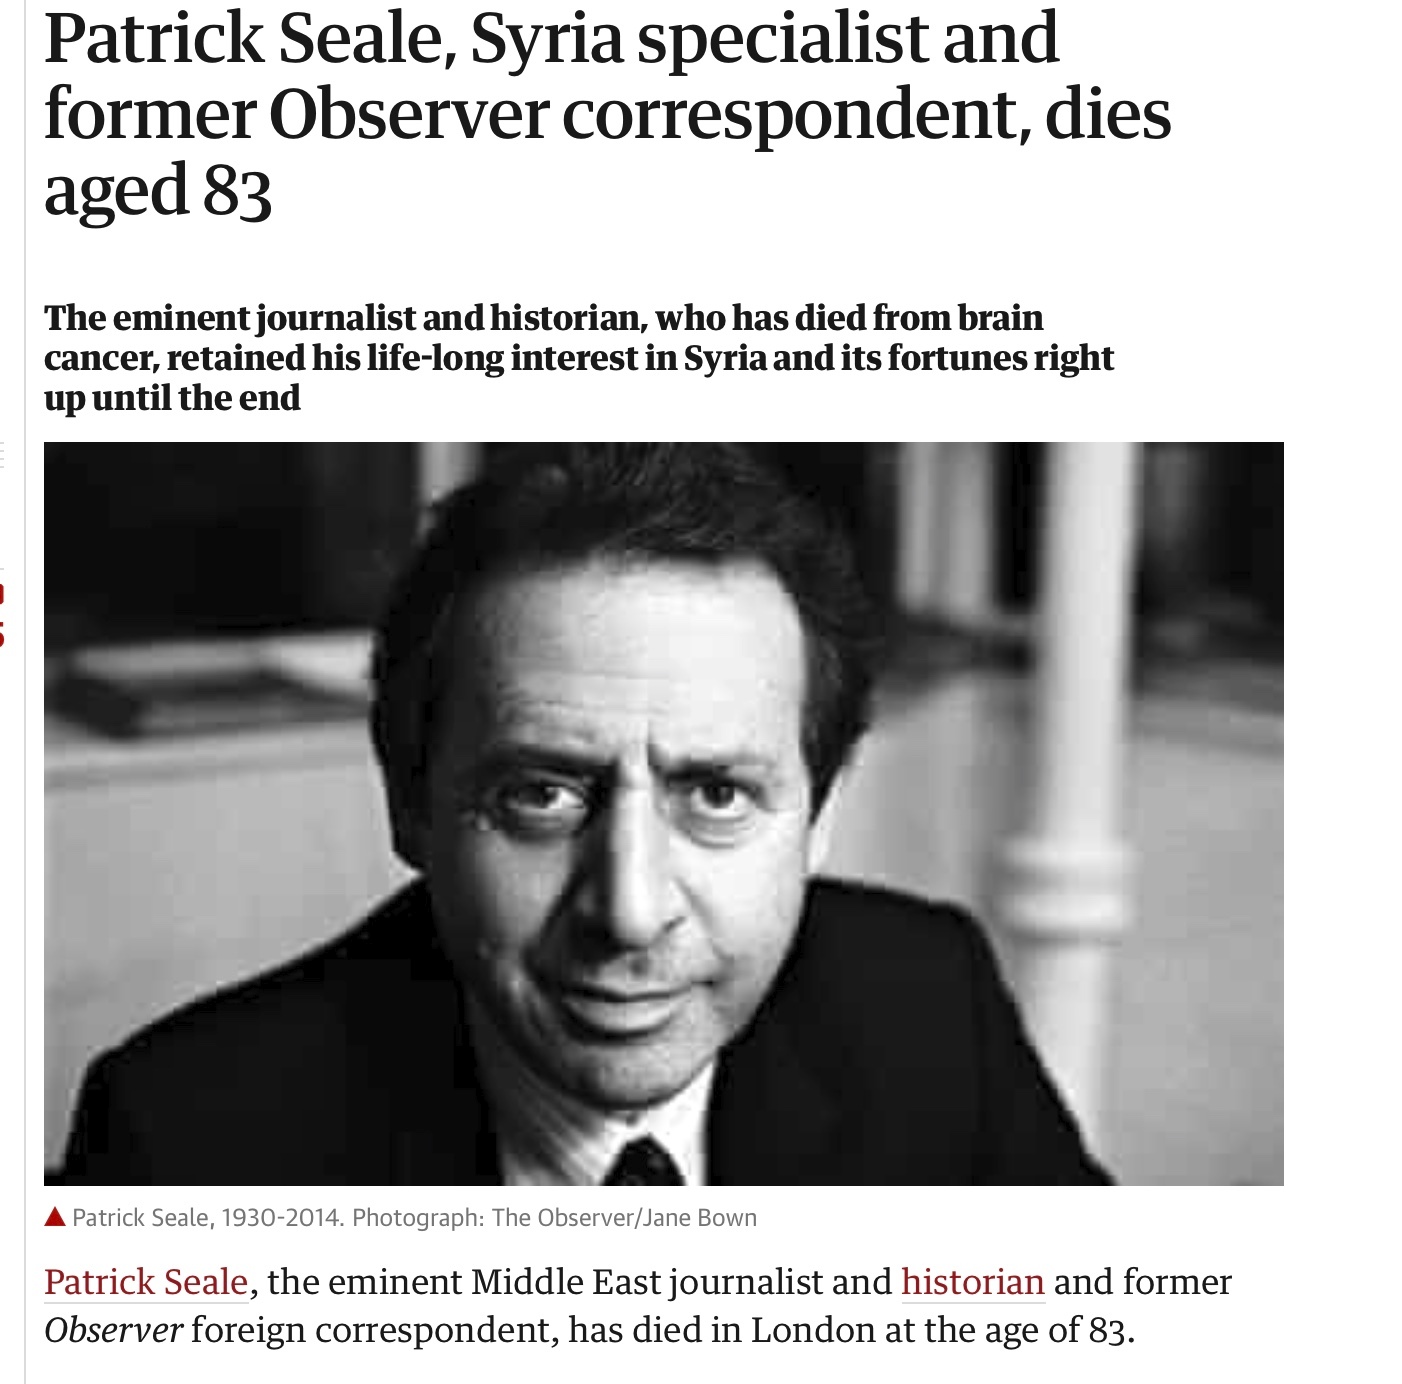 News paper article: Patrick Seale, Syria Specialist and former Observer correspondent, dies aged 83